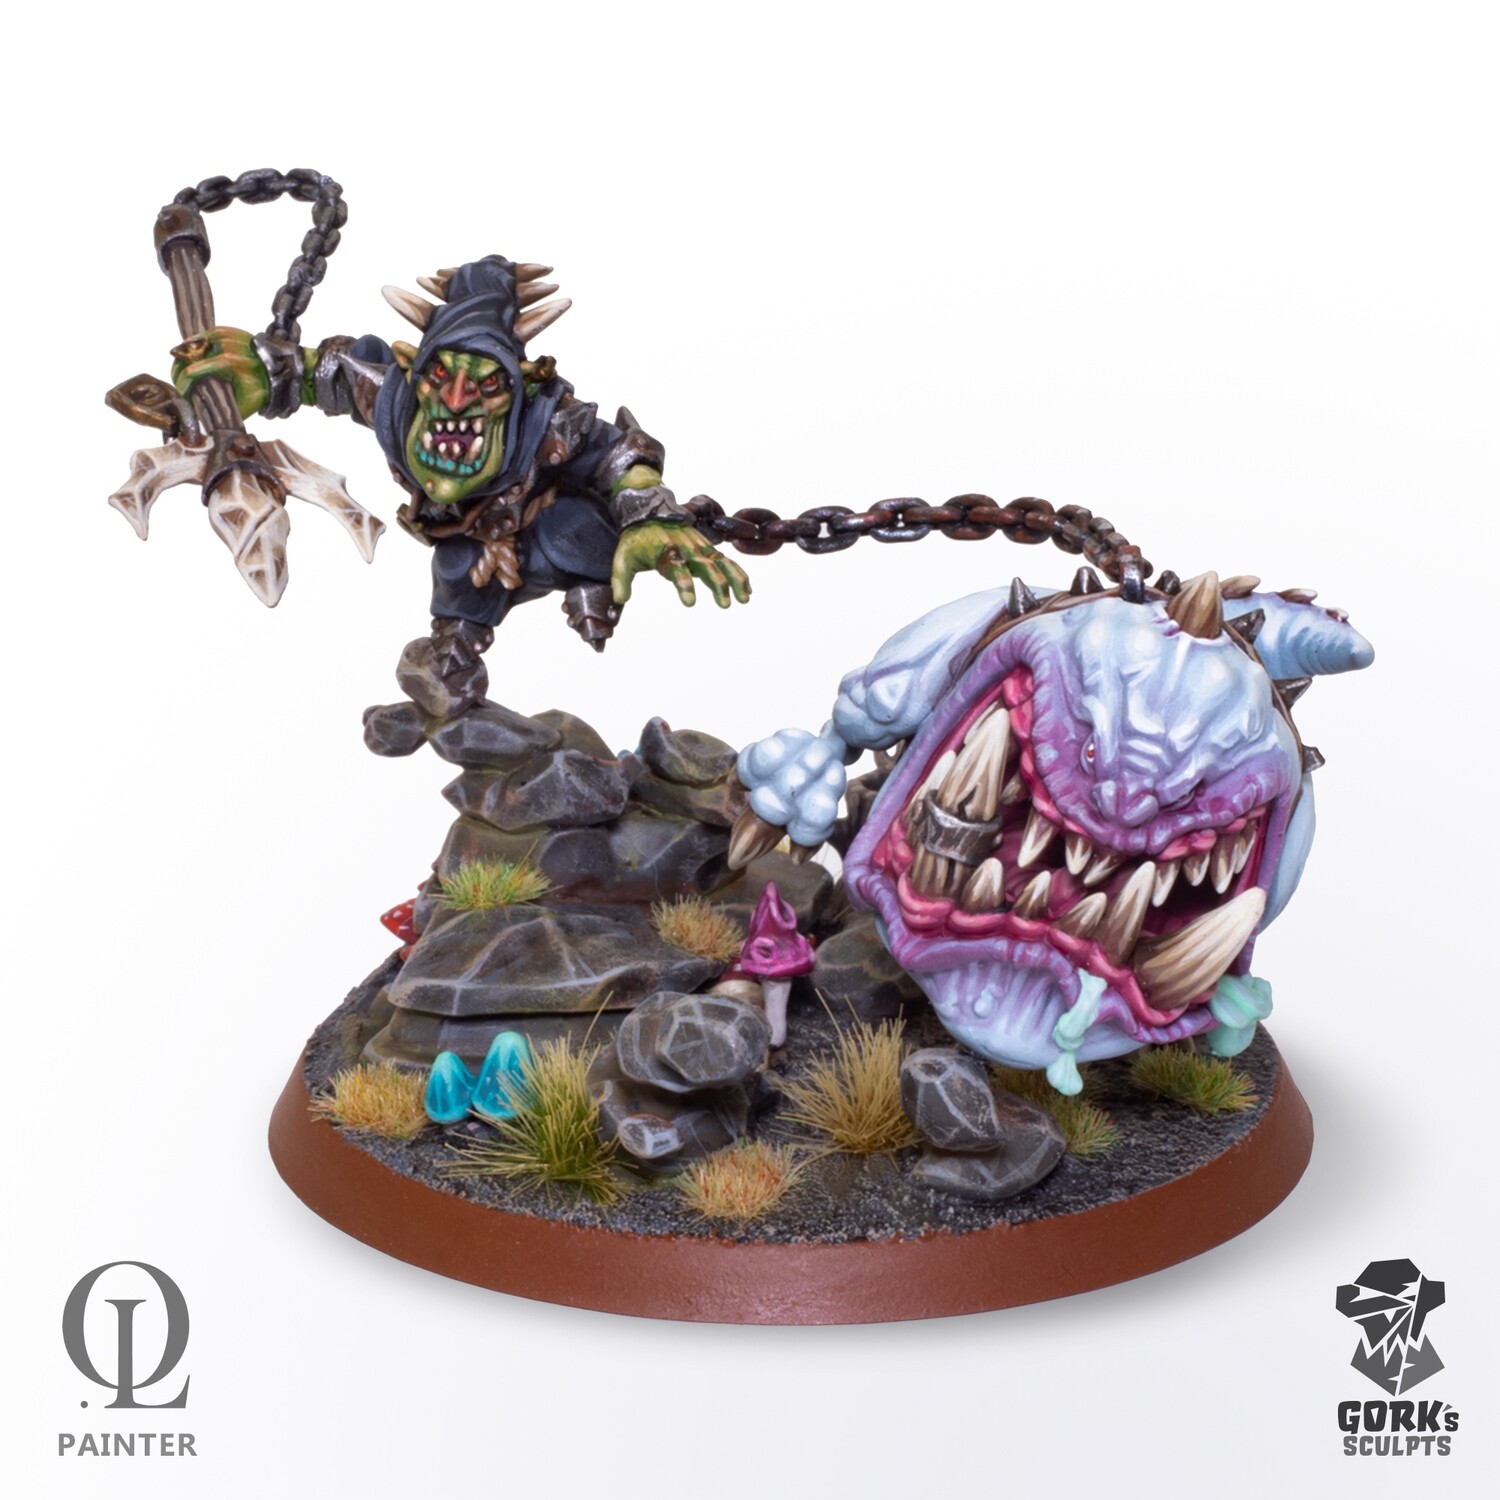 Boss goblin with cave monster - Printed